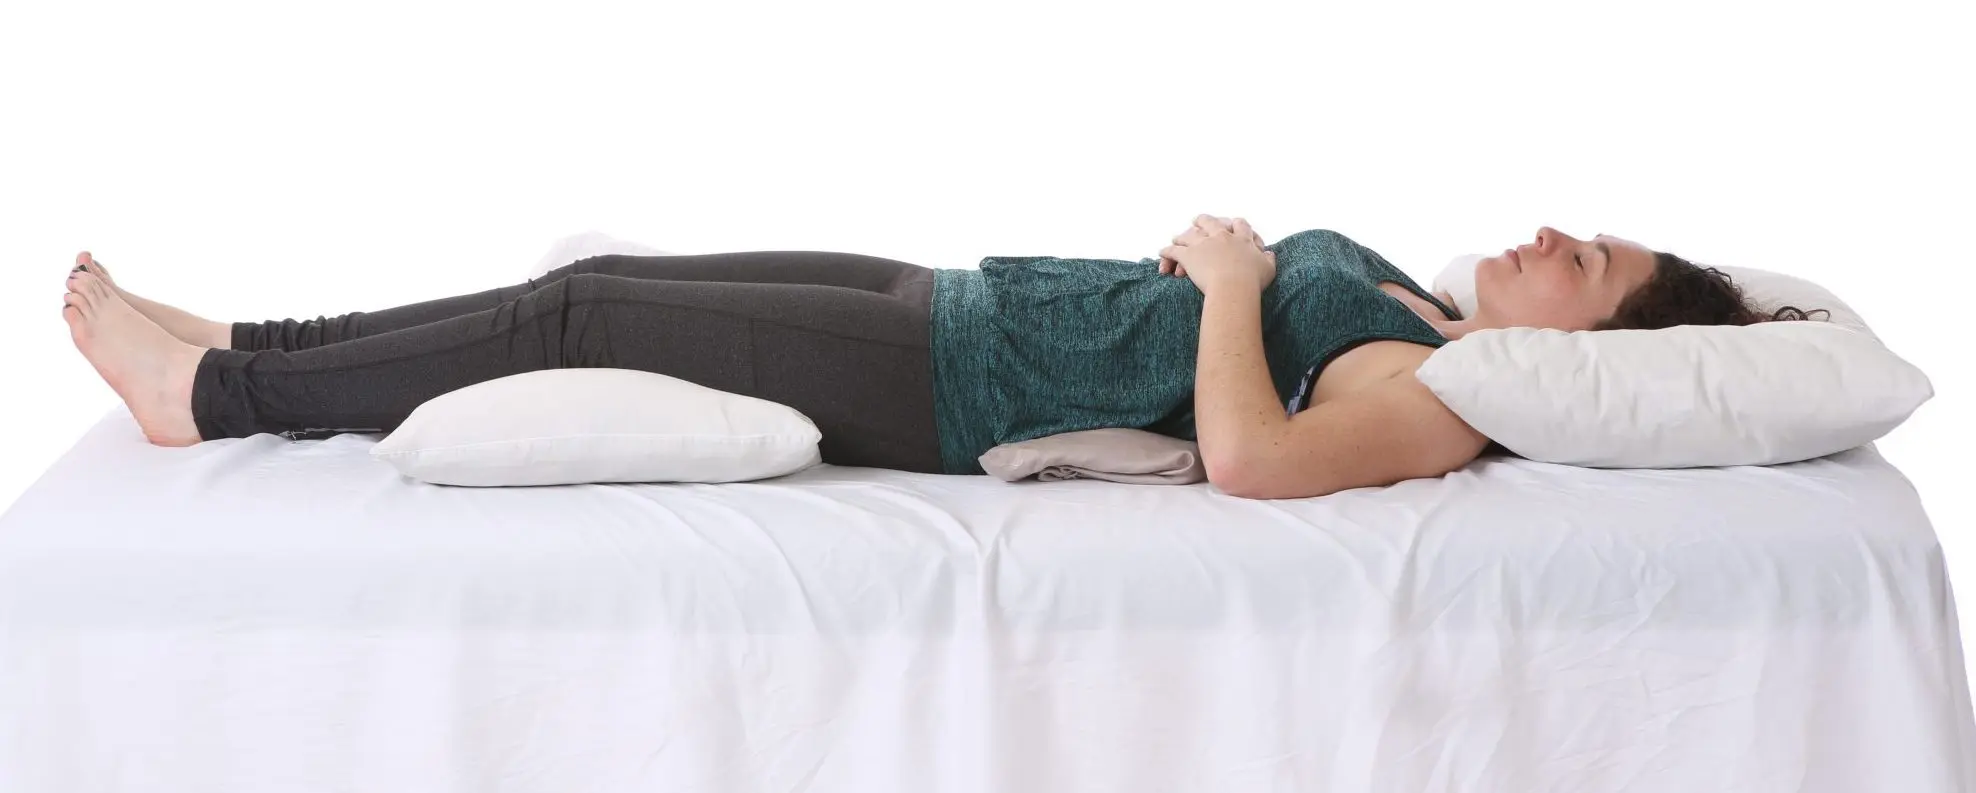 A person lying on their back on a white bed, hands clasped on their stomach, with a pillow under their head.